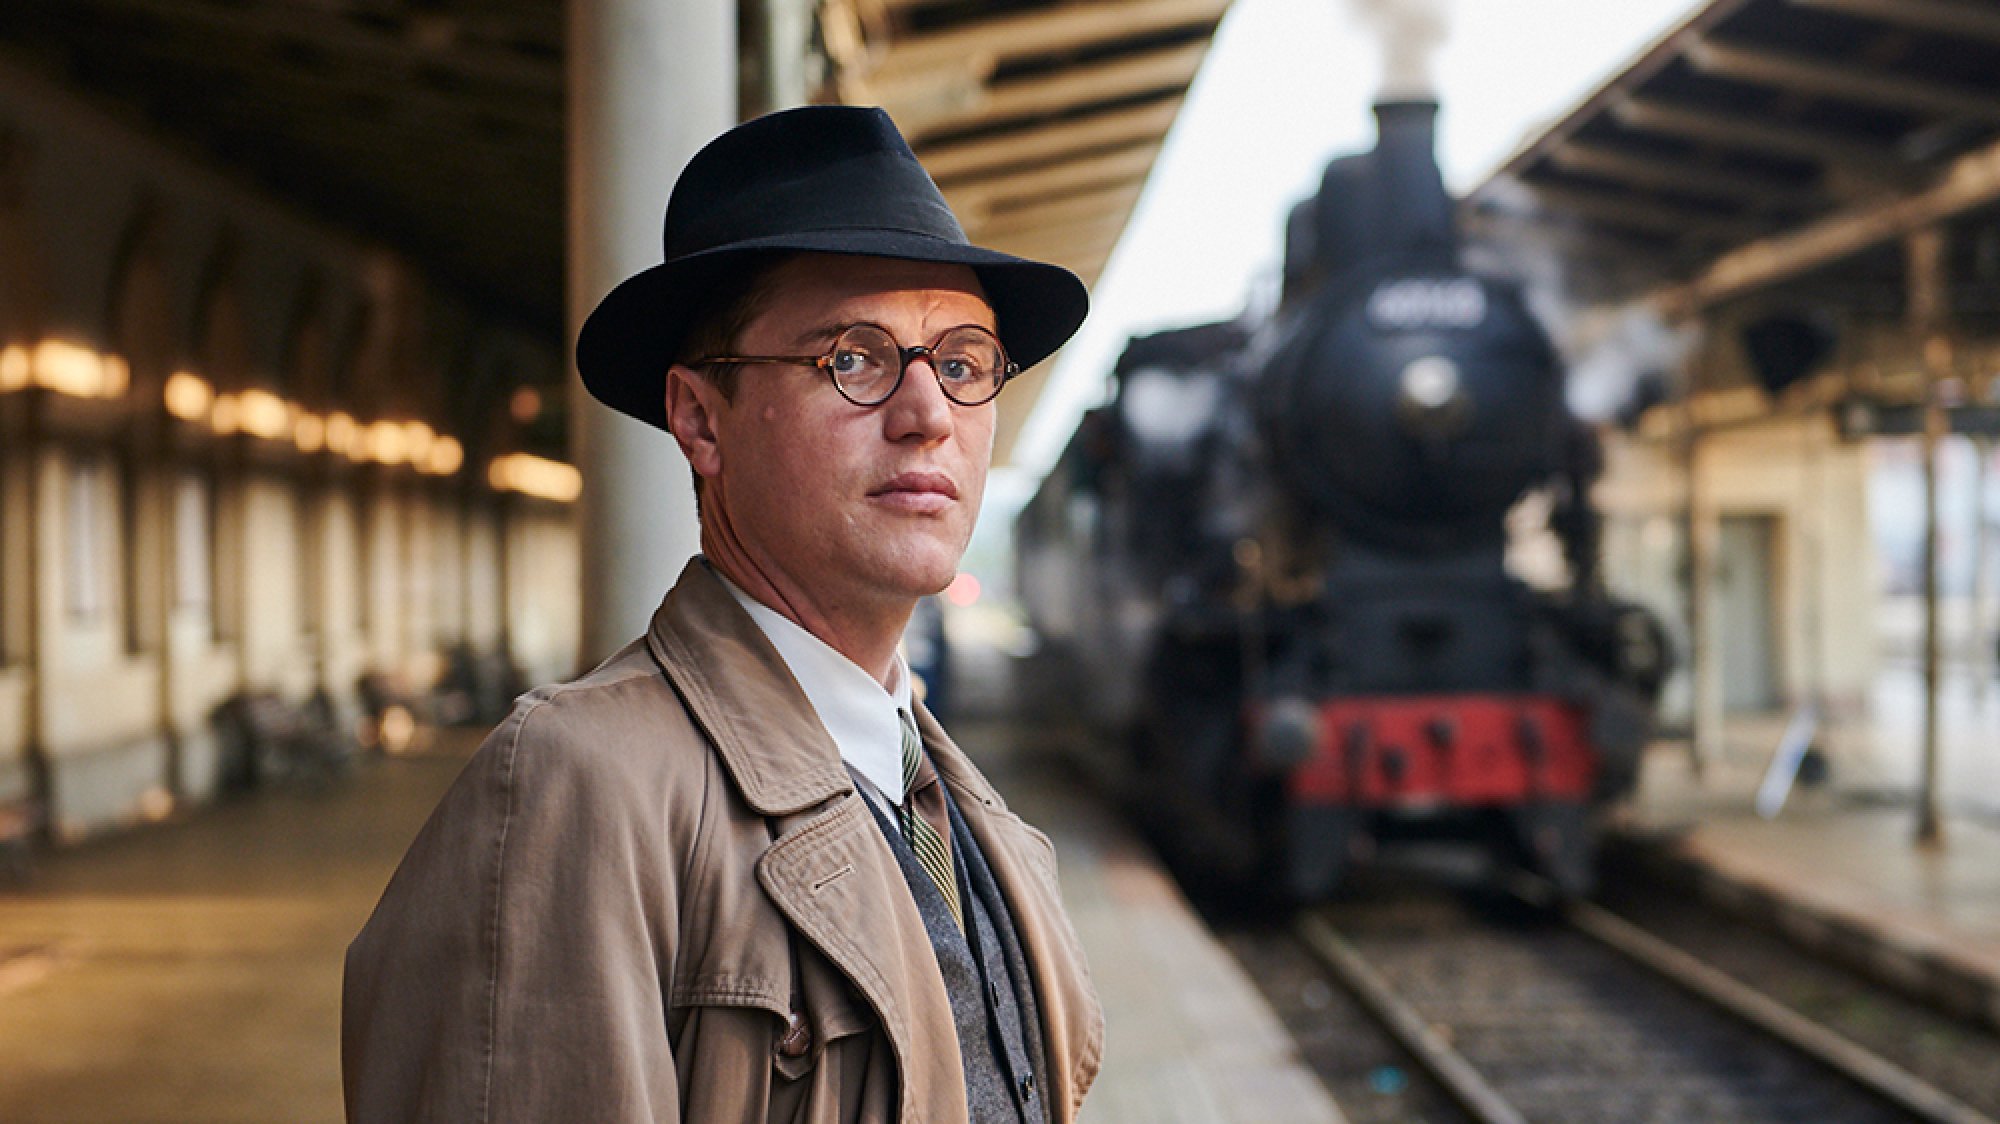 A young man wearing glasses stands on a train platform with a steam train in the background.